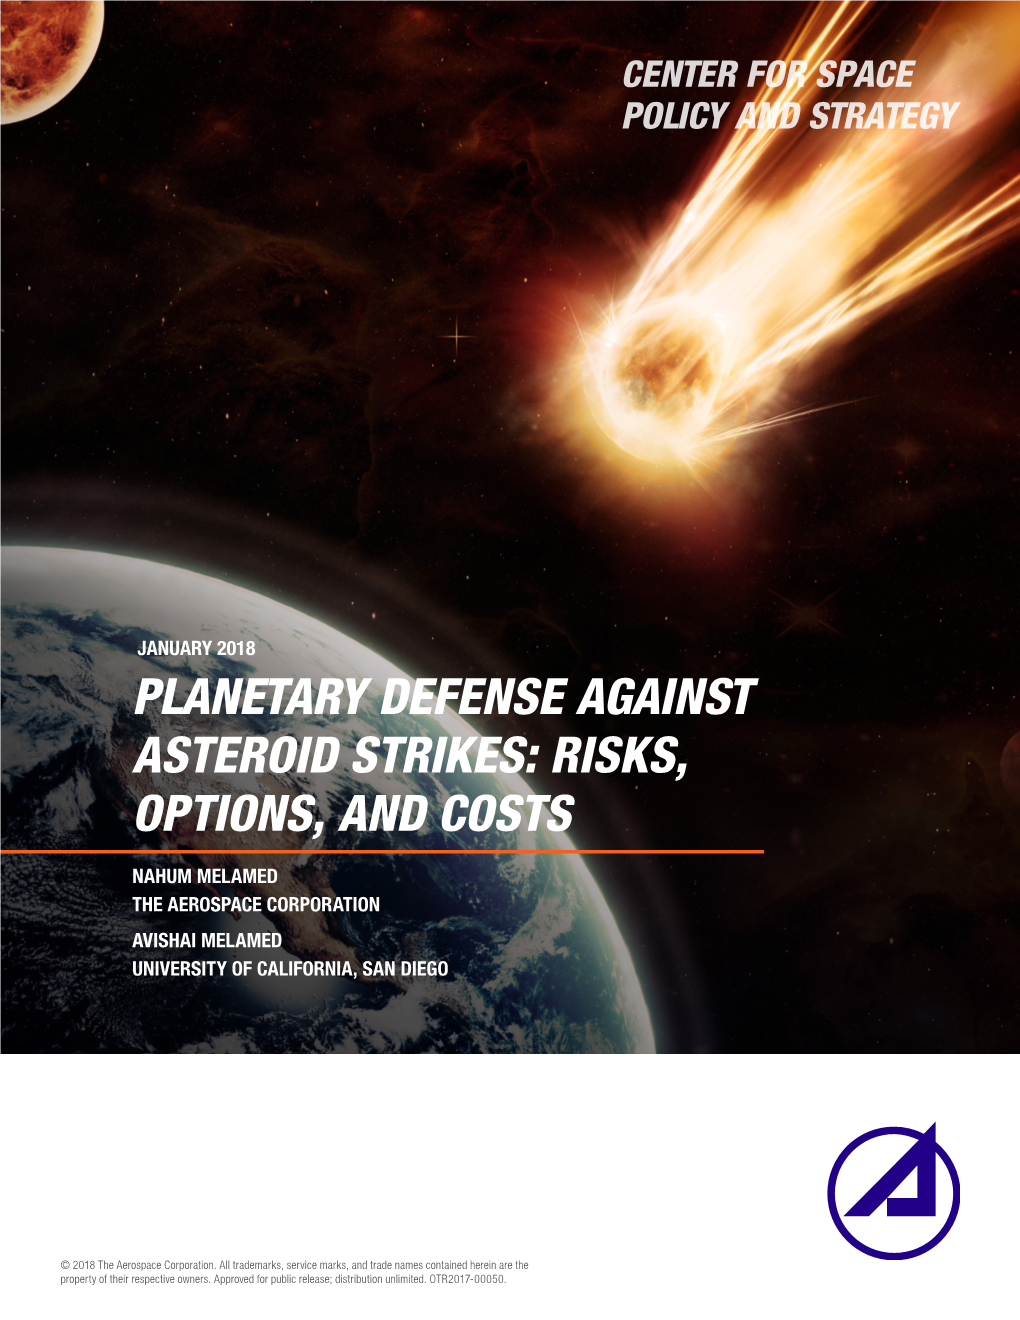 Planetary Defense Against Asteroid Strikes: Risks, Options, and Costs